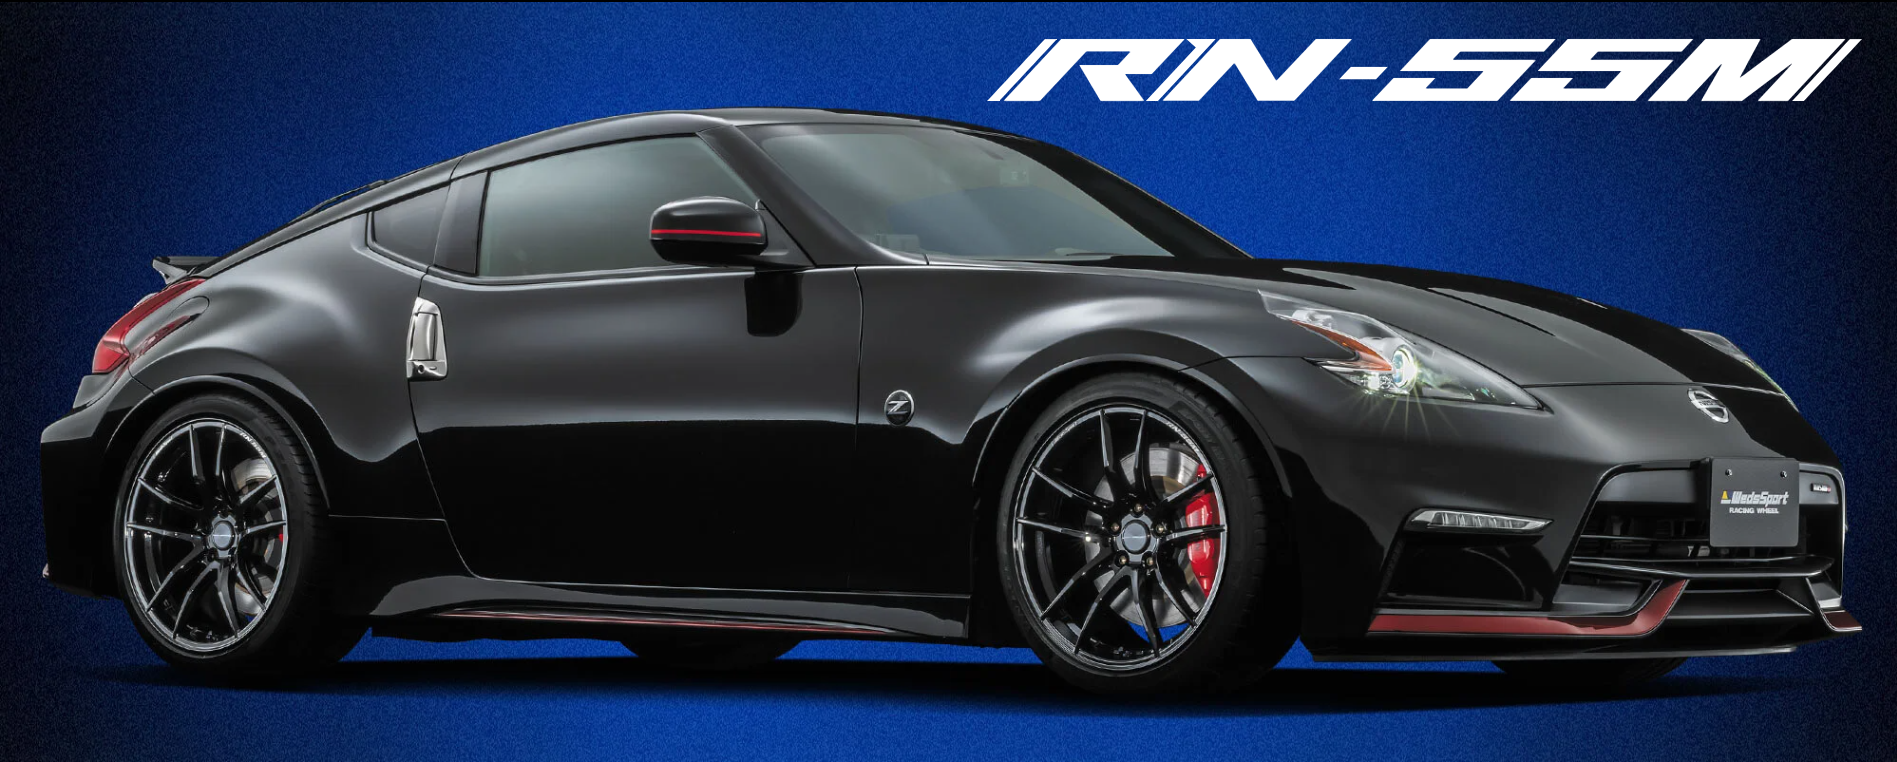 The nissan 370z rn - sm is shown on a blue background.